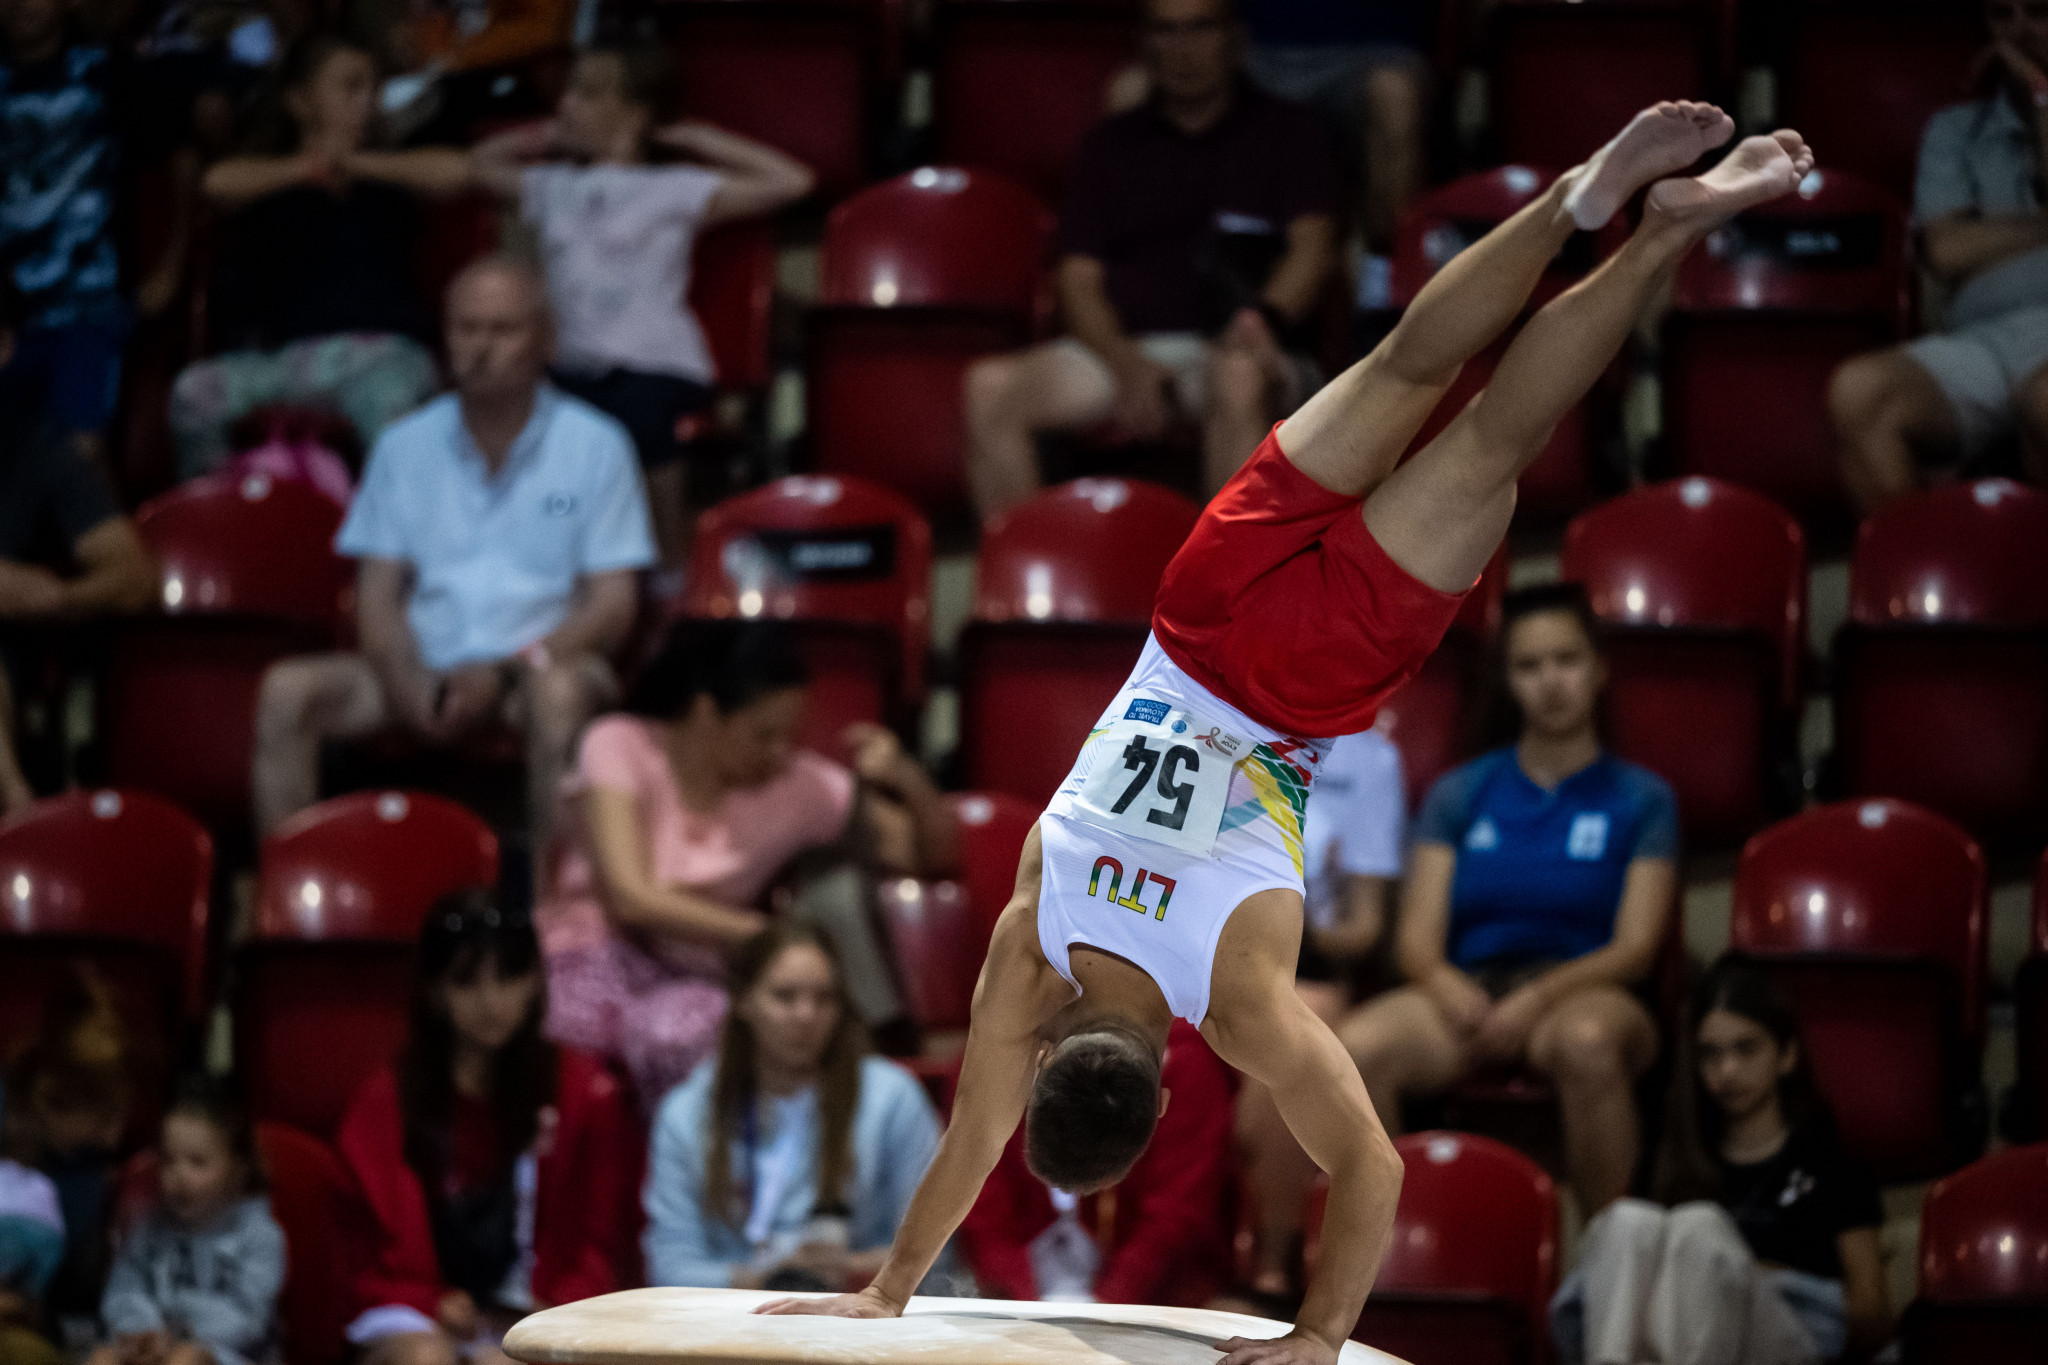 Lithuanian Kristijomas Padeginas, Danny Crouch of Britain, and Swede Luis Il-Sung Melander picked up gold medals in the boys' artistic gymnastics finals ©EYOF Banská Bystrica 2022